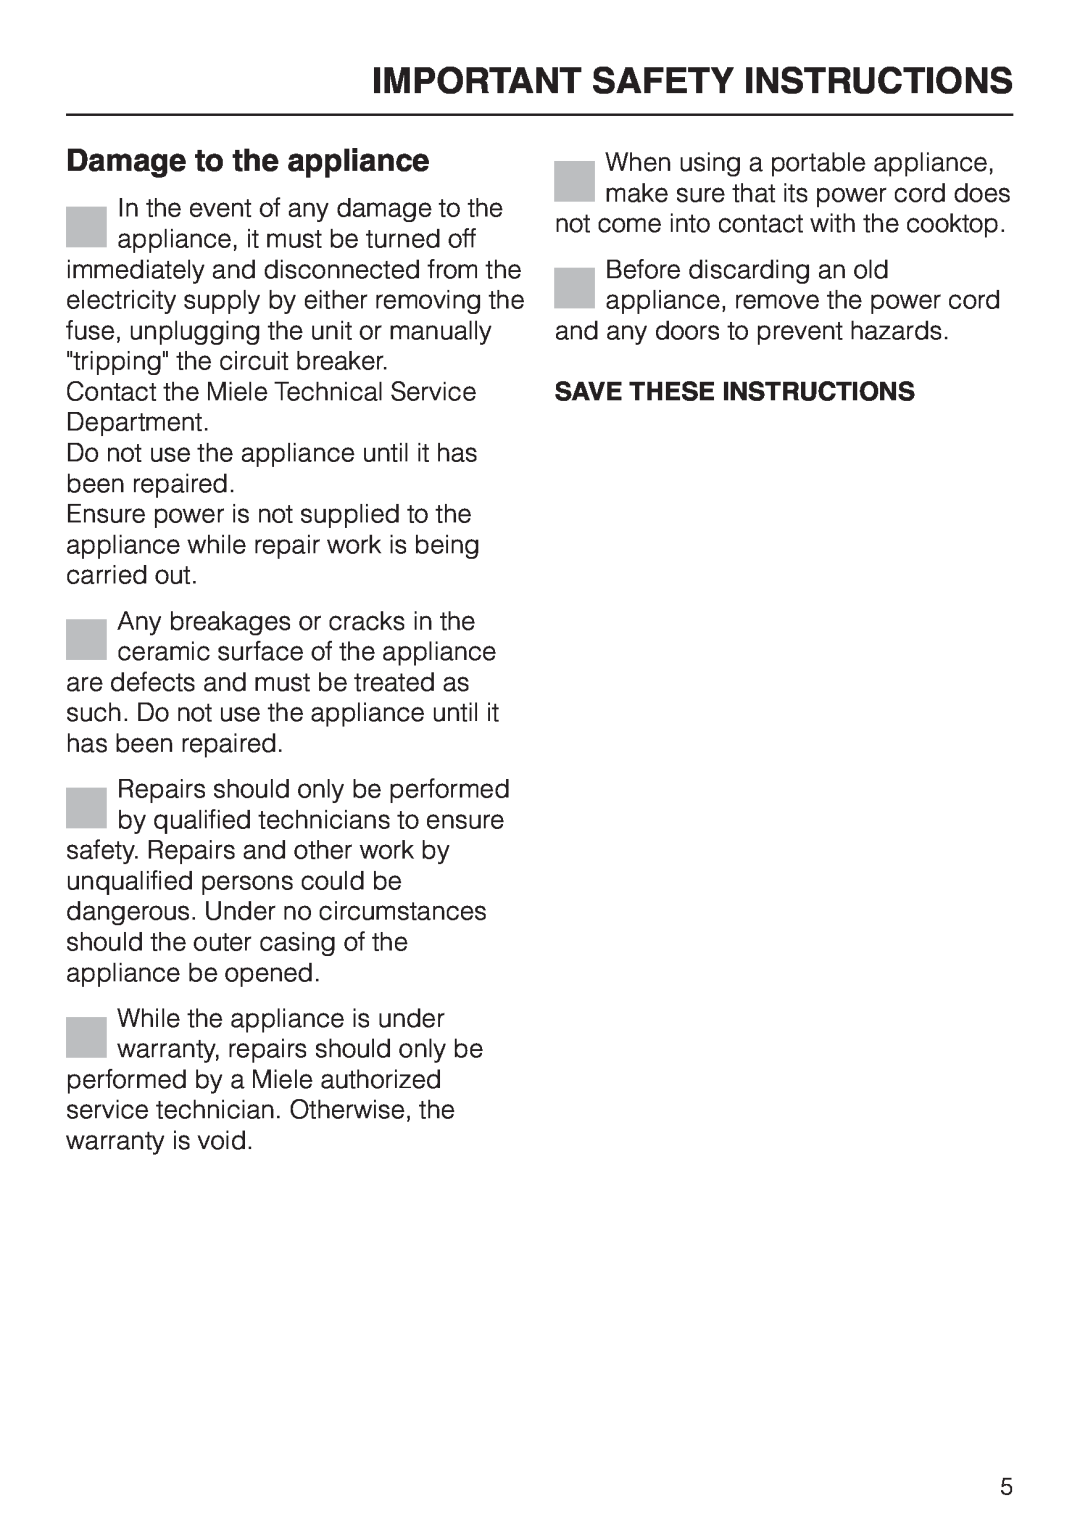 Miele KM 411 manual Damage to the appliance, Save These Instructions, Important Safety Instructions 